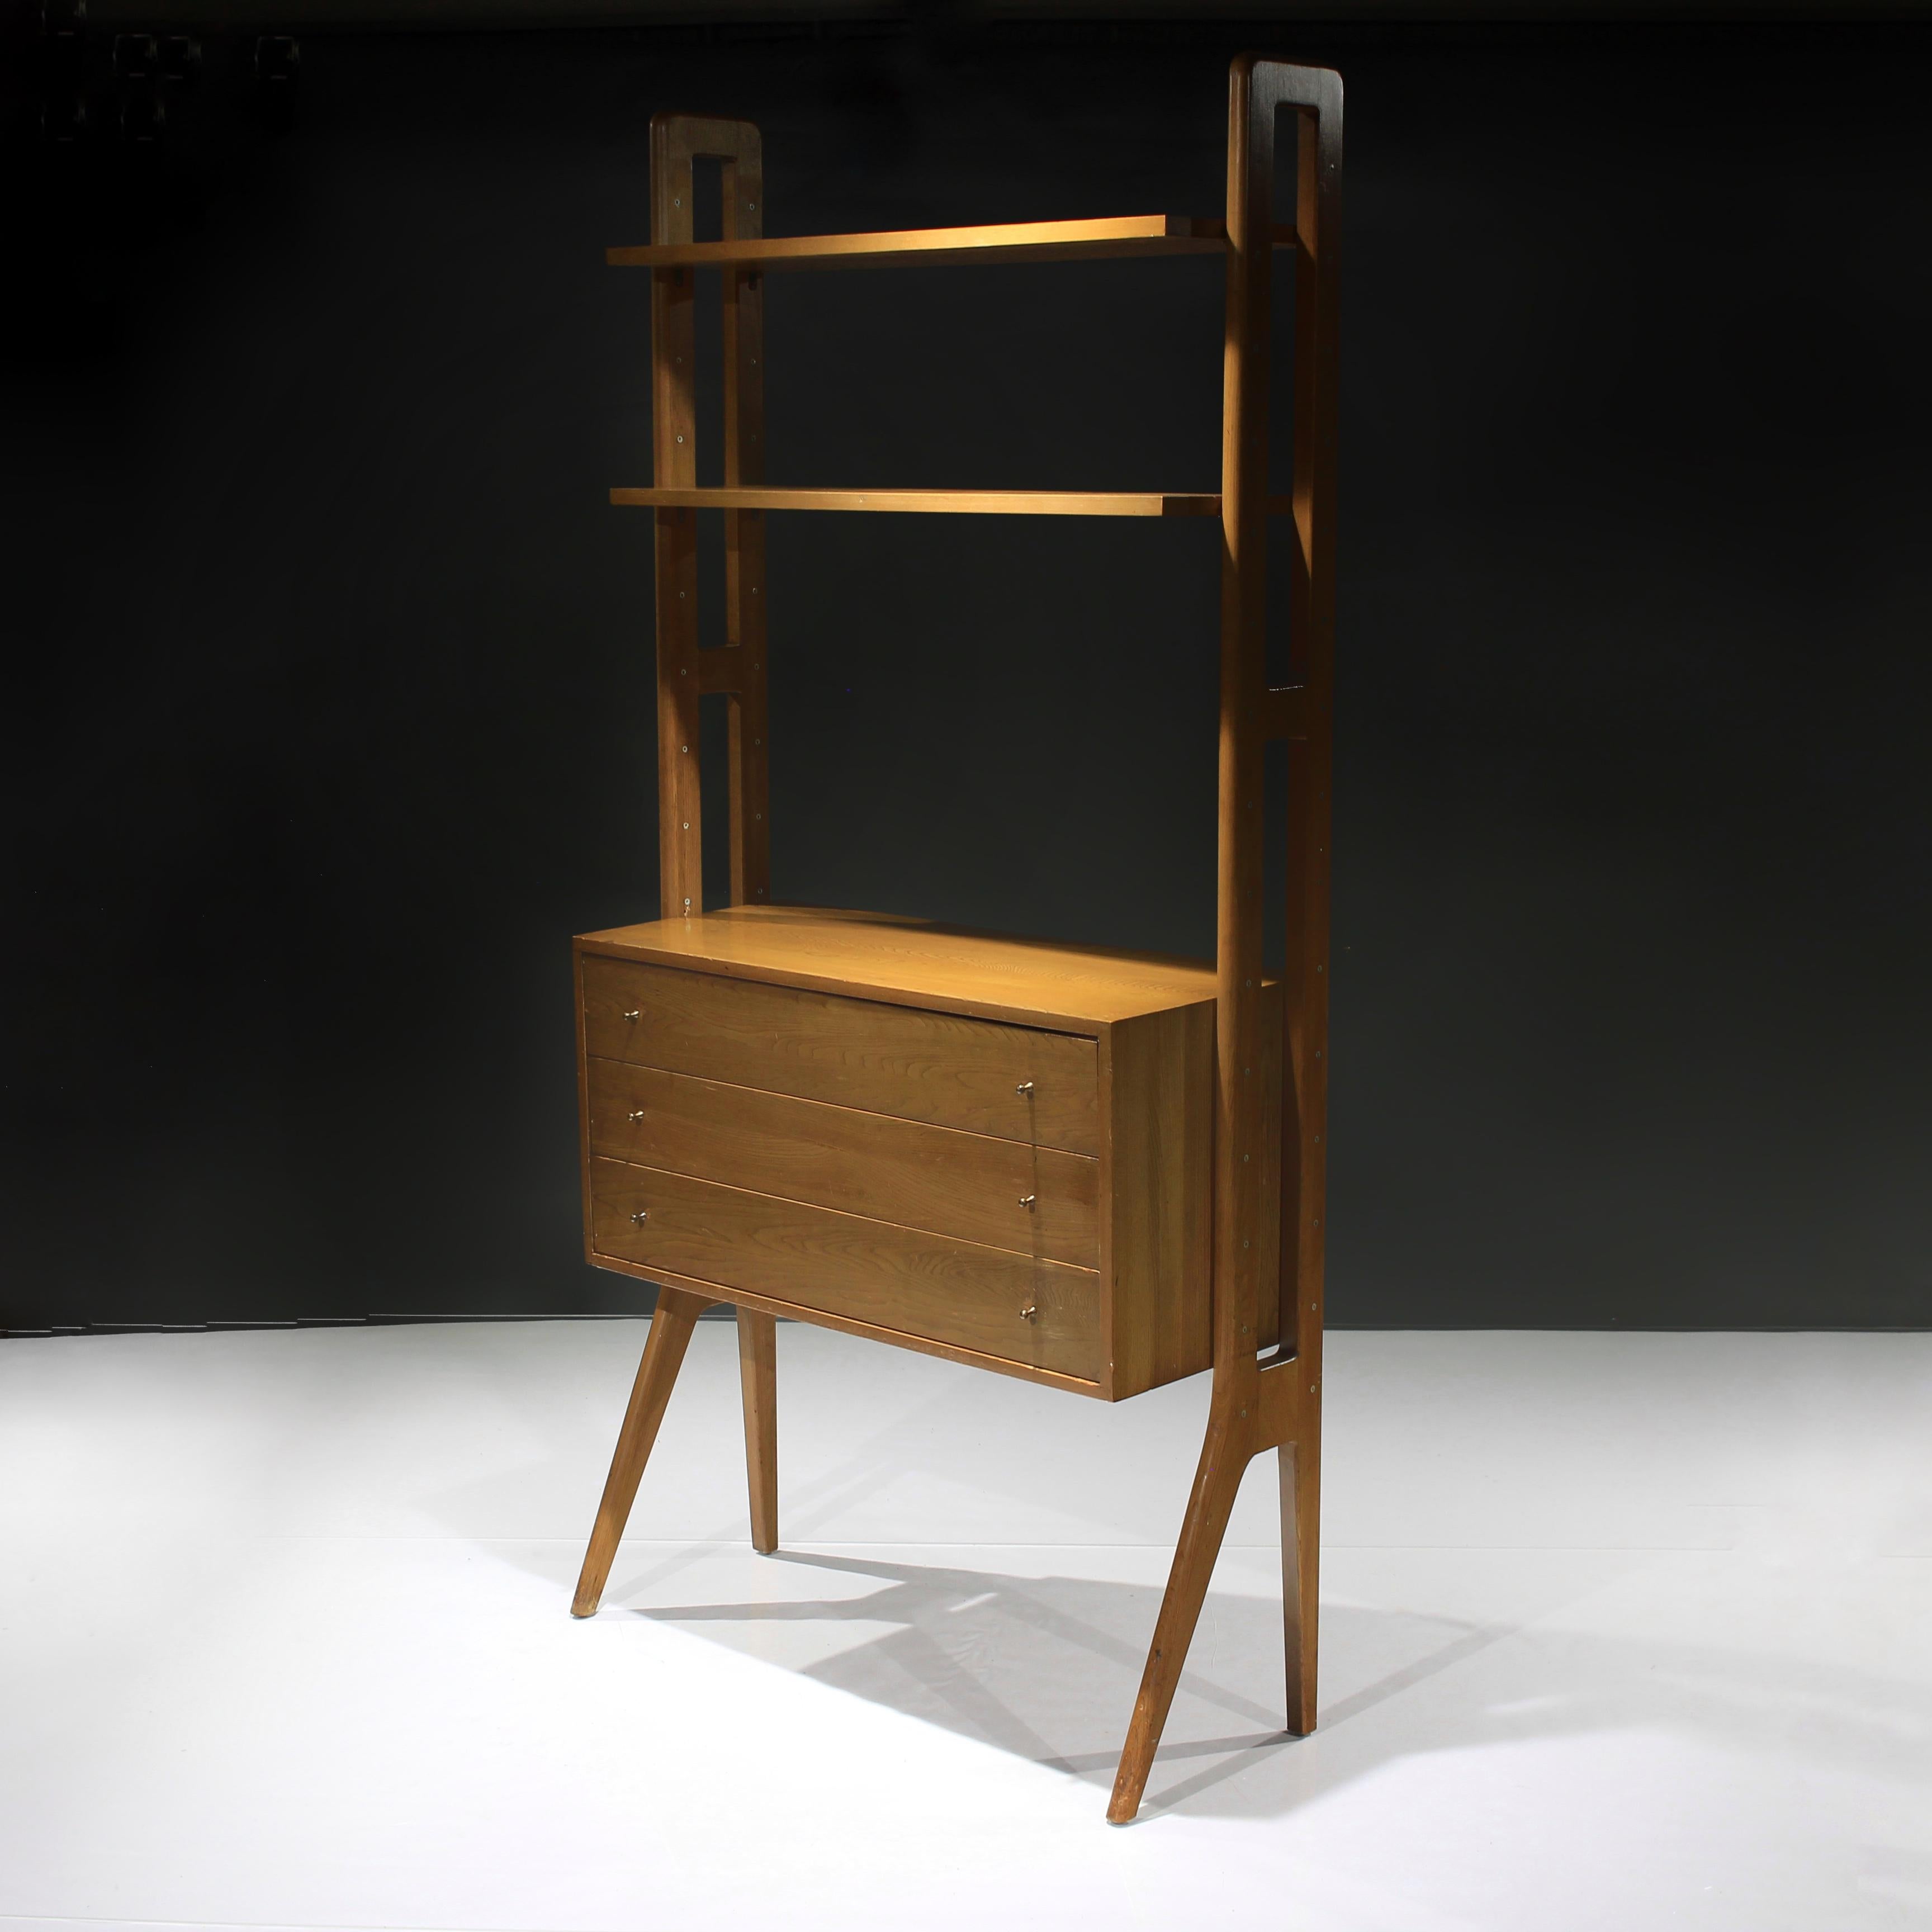 Presenting this beautiful bookcase with drawers in oak in the manner of Kurt Østervig of Denmark. Approximate age 1960s.

Incredible stately appearance with its splayed legs and versatile design element such as the adjustable drawer unit and